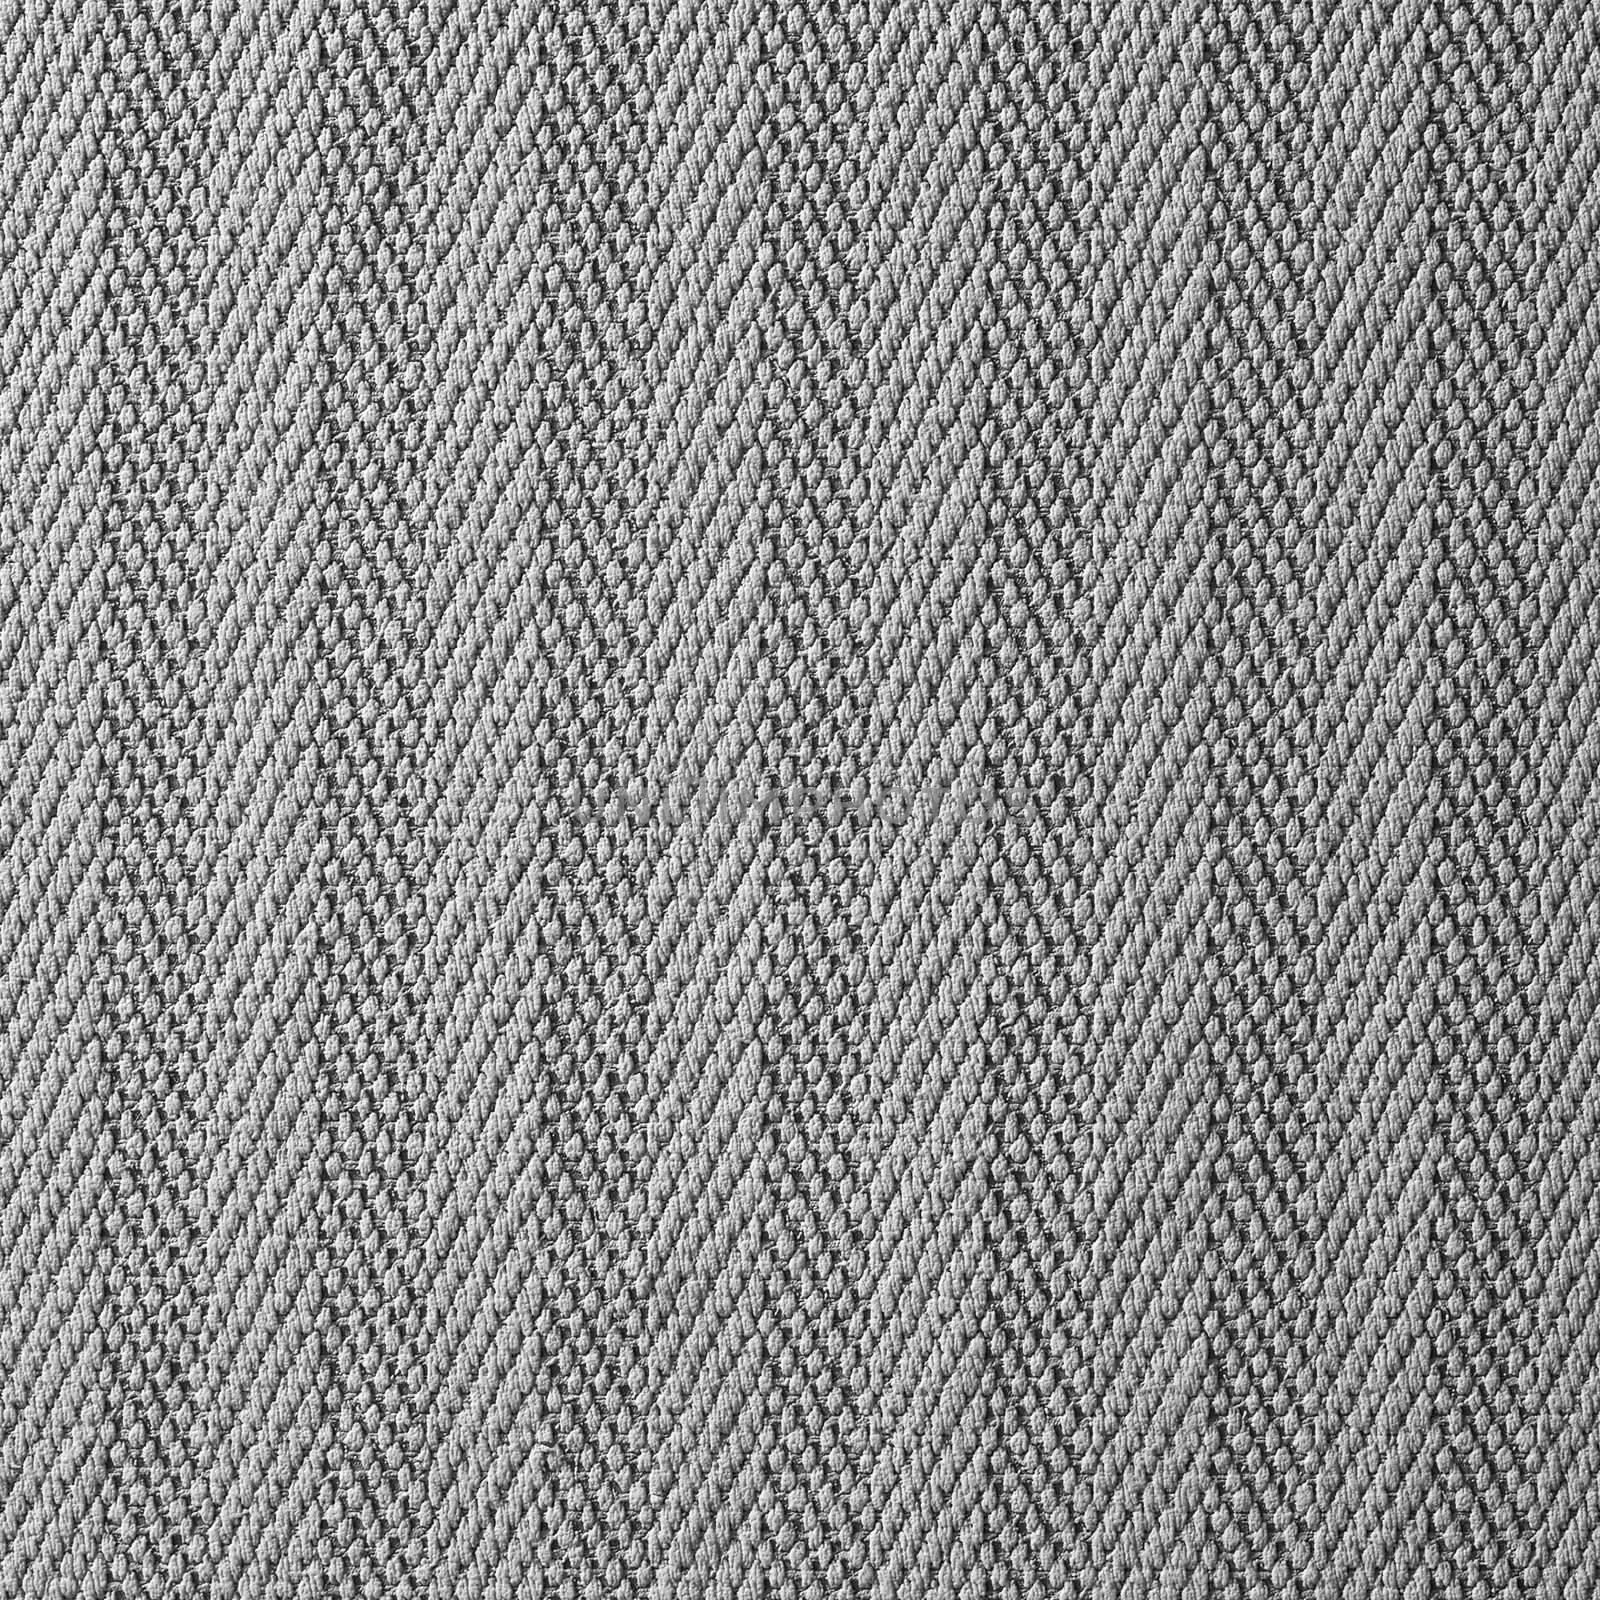 The surface of monochrome wallpaper